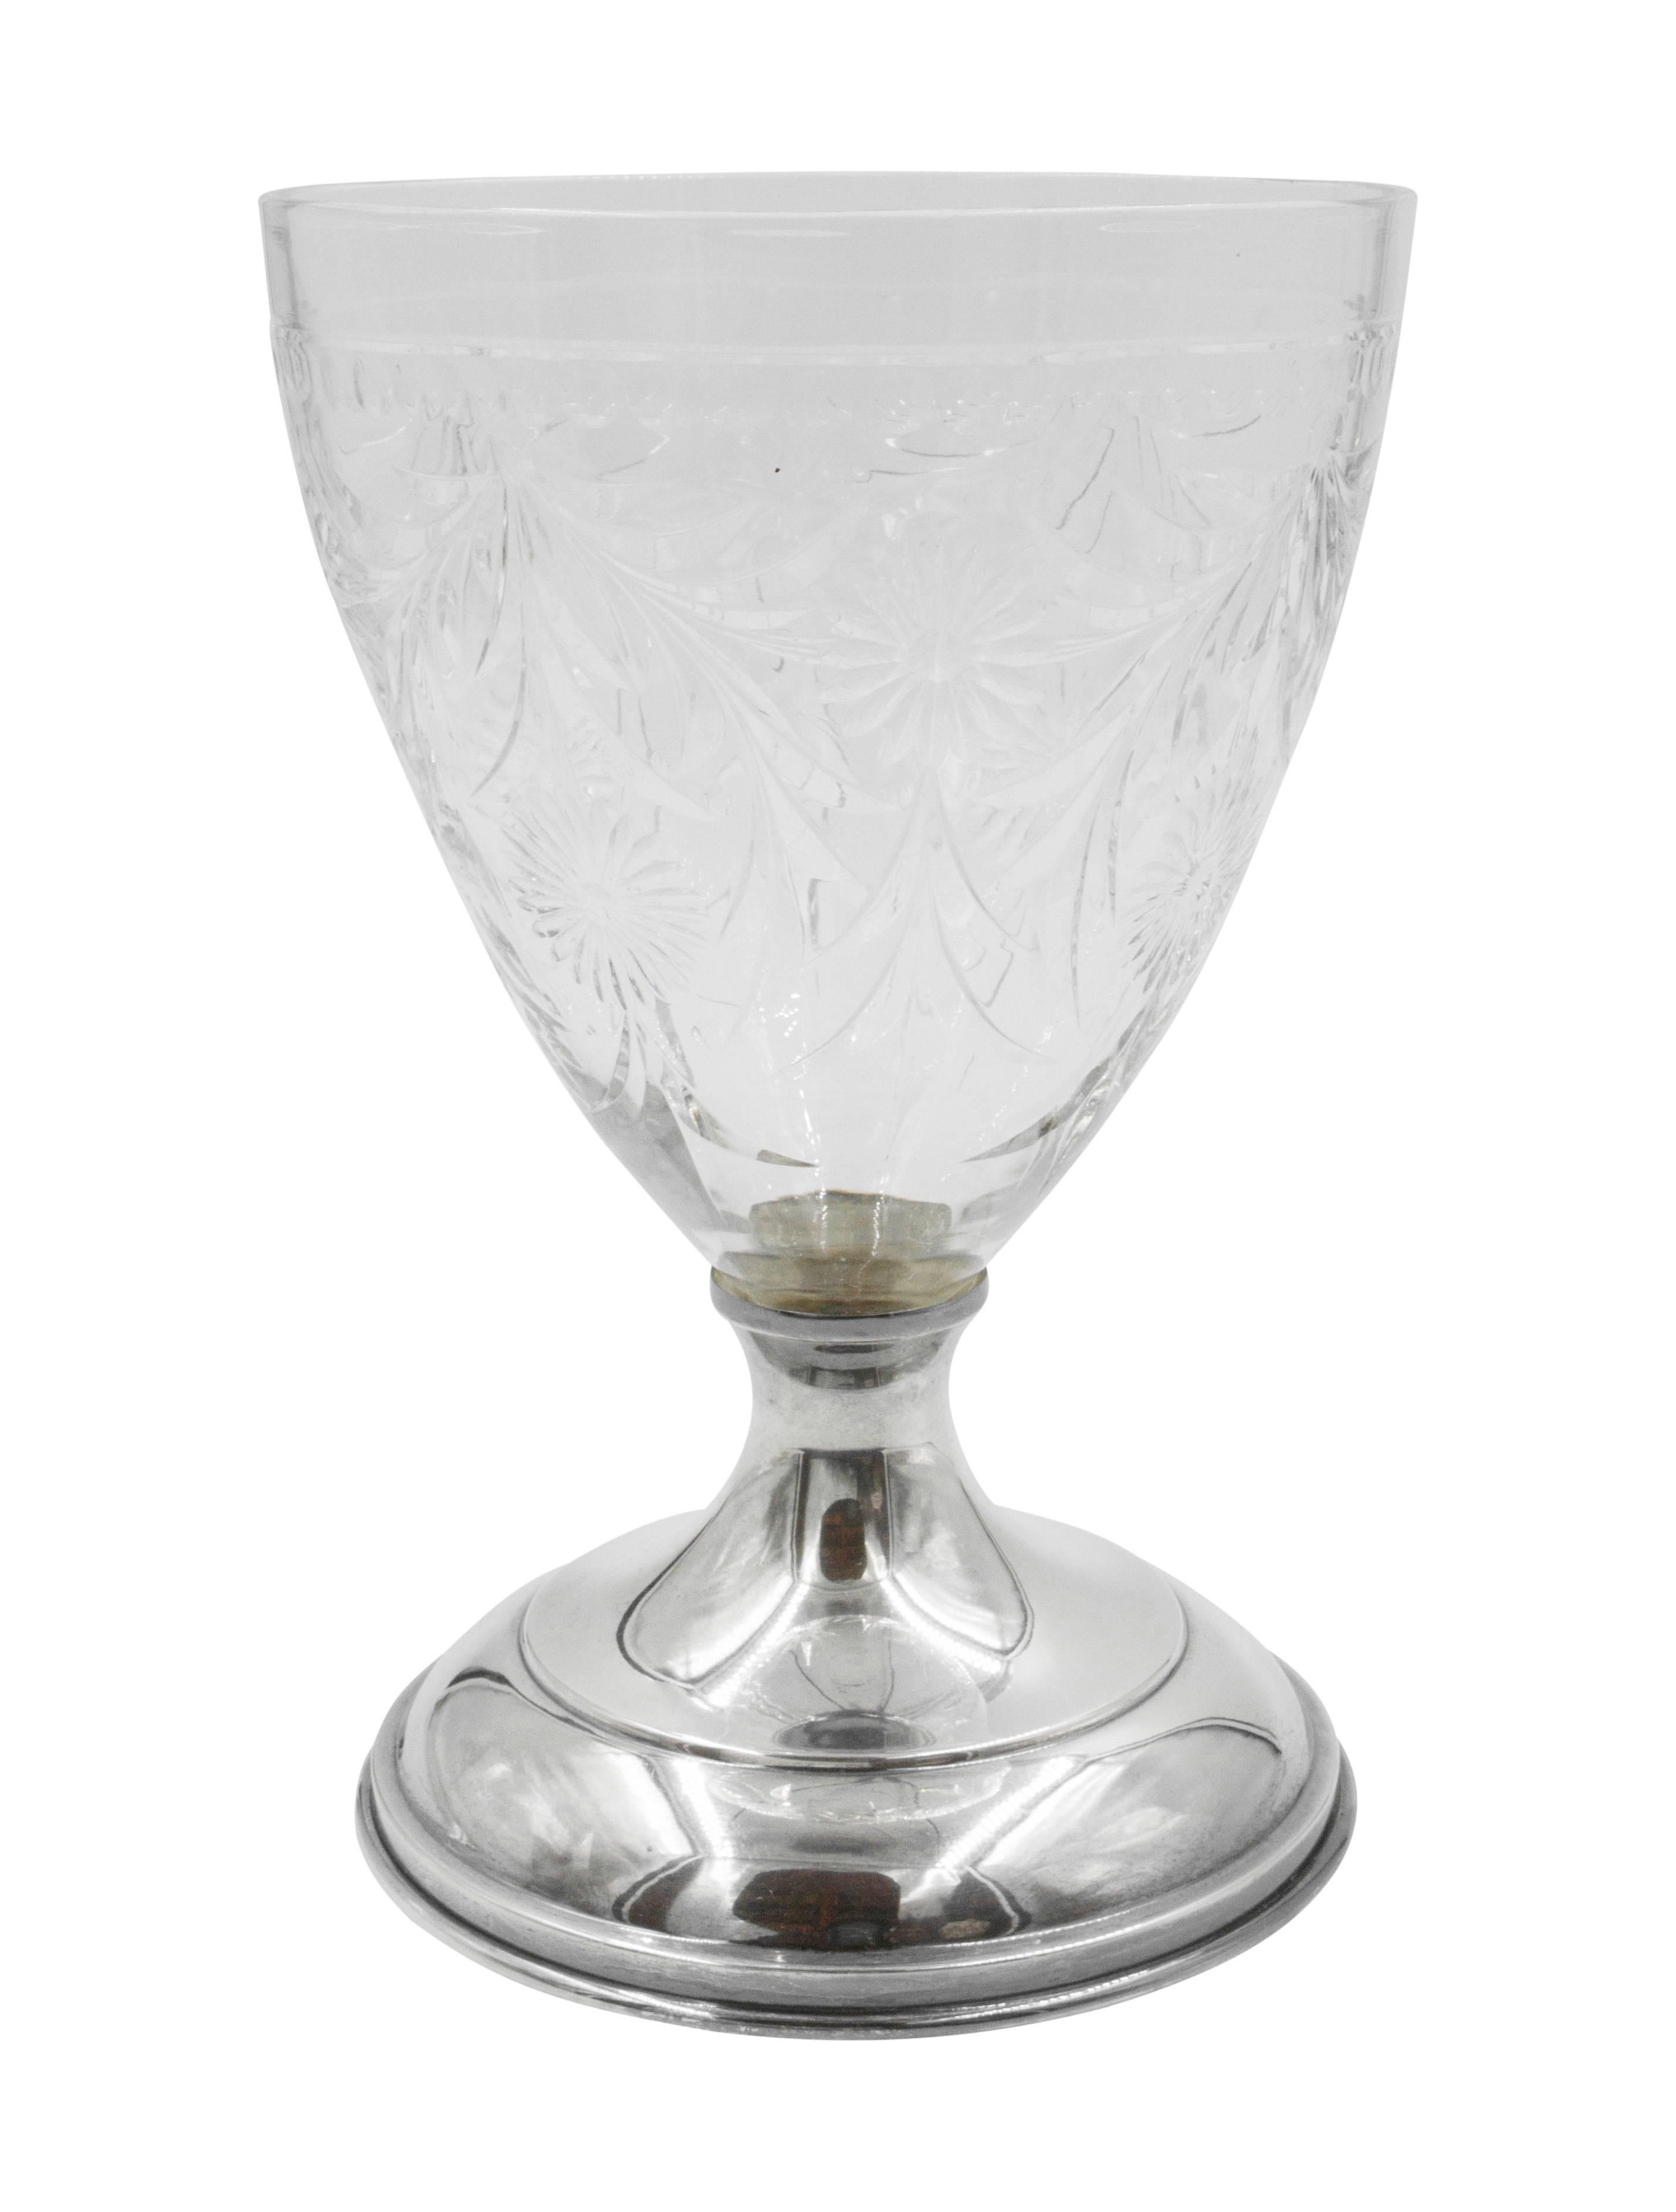 We are so proud to offer this breathtaking pair of crystal urns with sterling silver base and top. Old-world elegance etched throughout the body and cover of the urns; sunflowers and garlands cut into the crystal. These would look lovely on a coffee